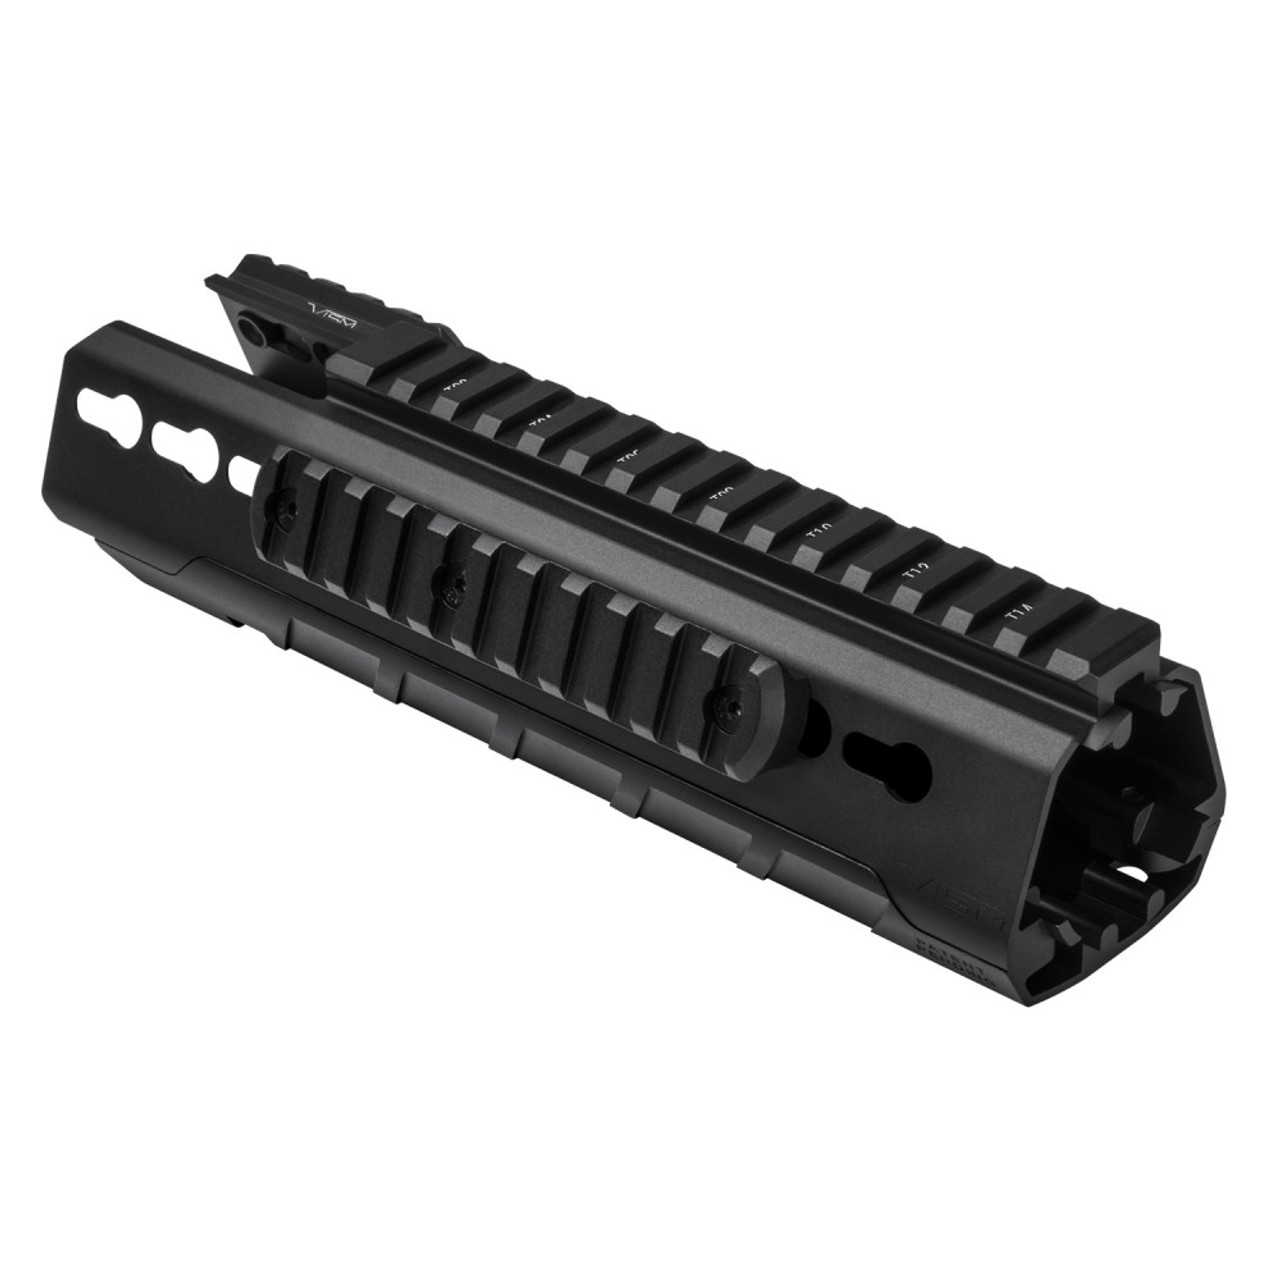 NcSTAR VMARTKMC 223/556 Triangle Keymod Handguard/ Two Piece/ Drop In Fit/ Carbine Length